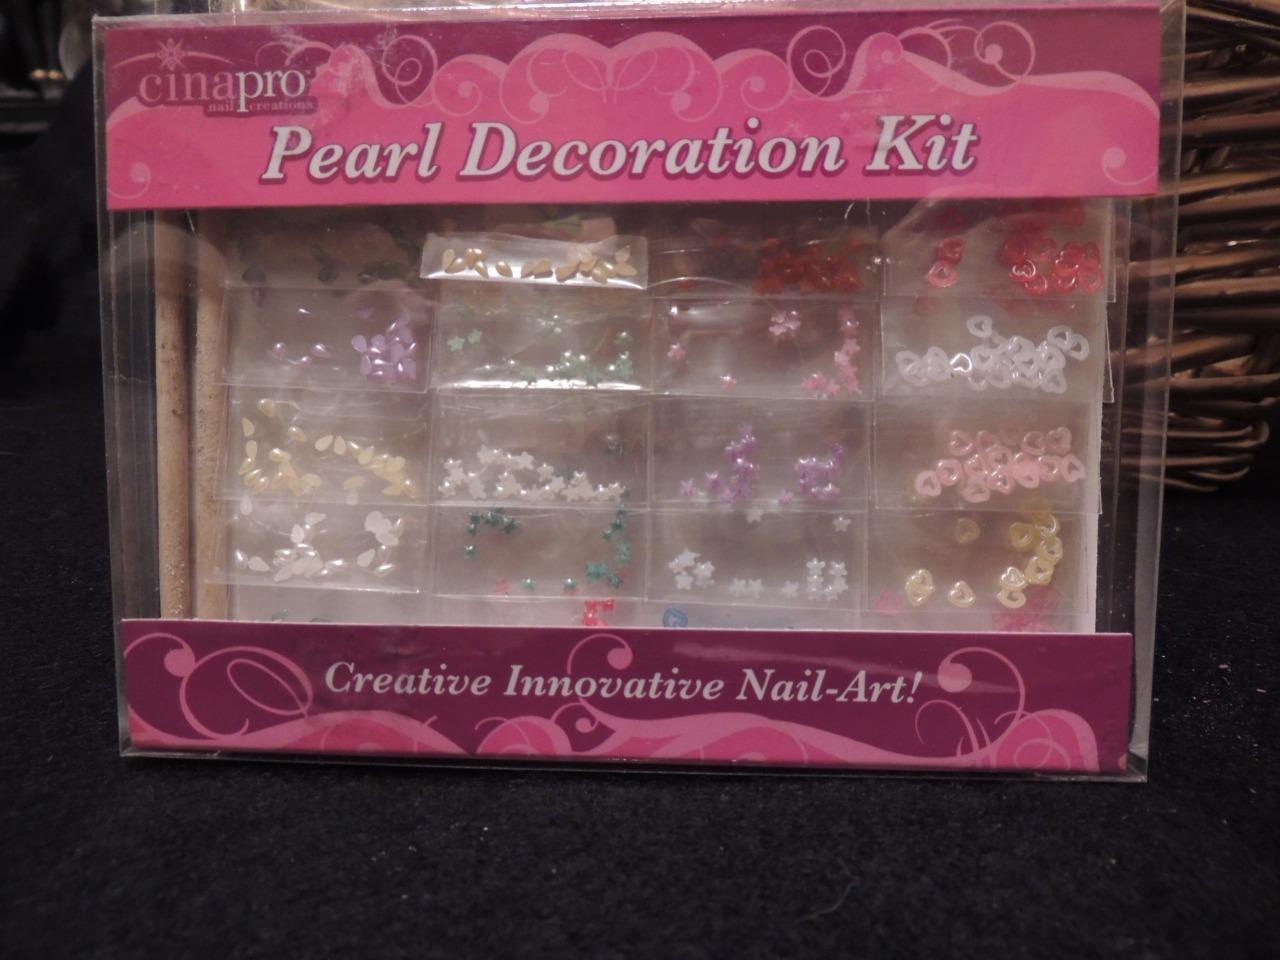 7. "Discounted Nail Art Kits in India" - wide 6